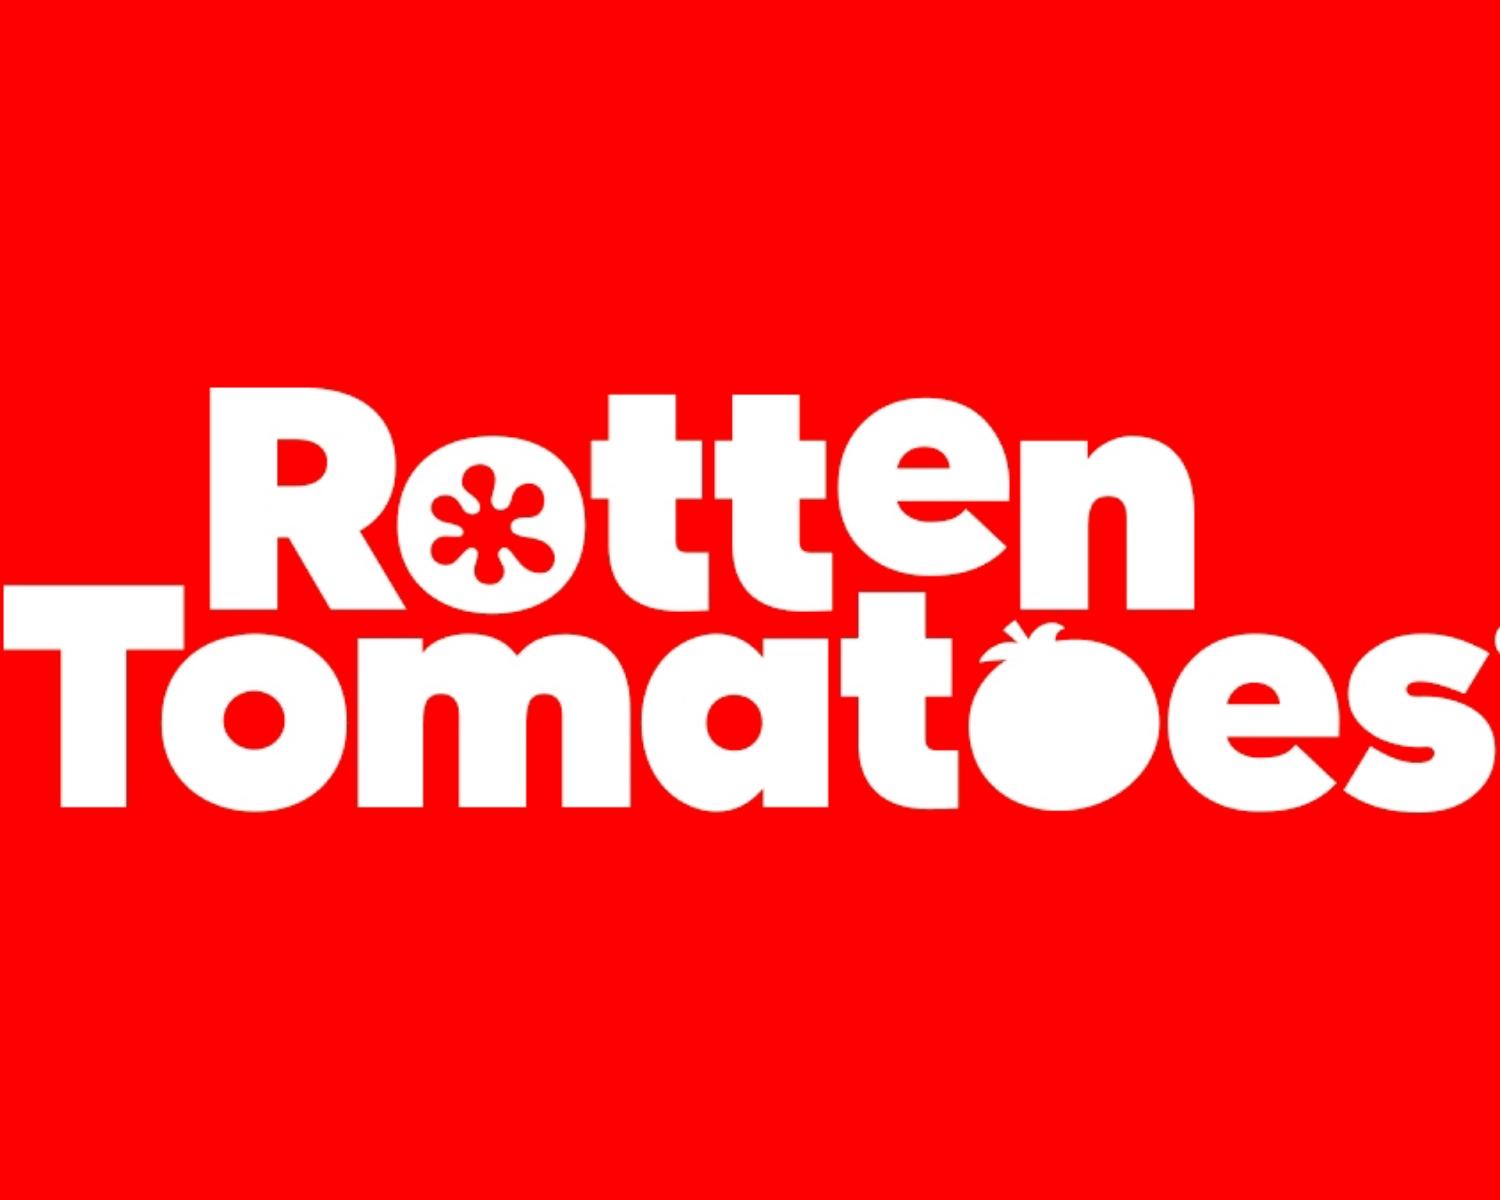 THE ROTTEN TOMATOES